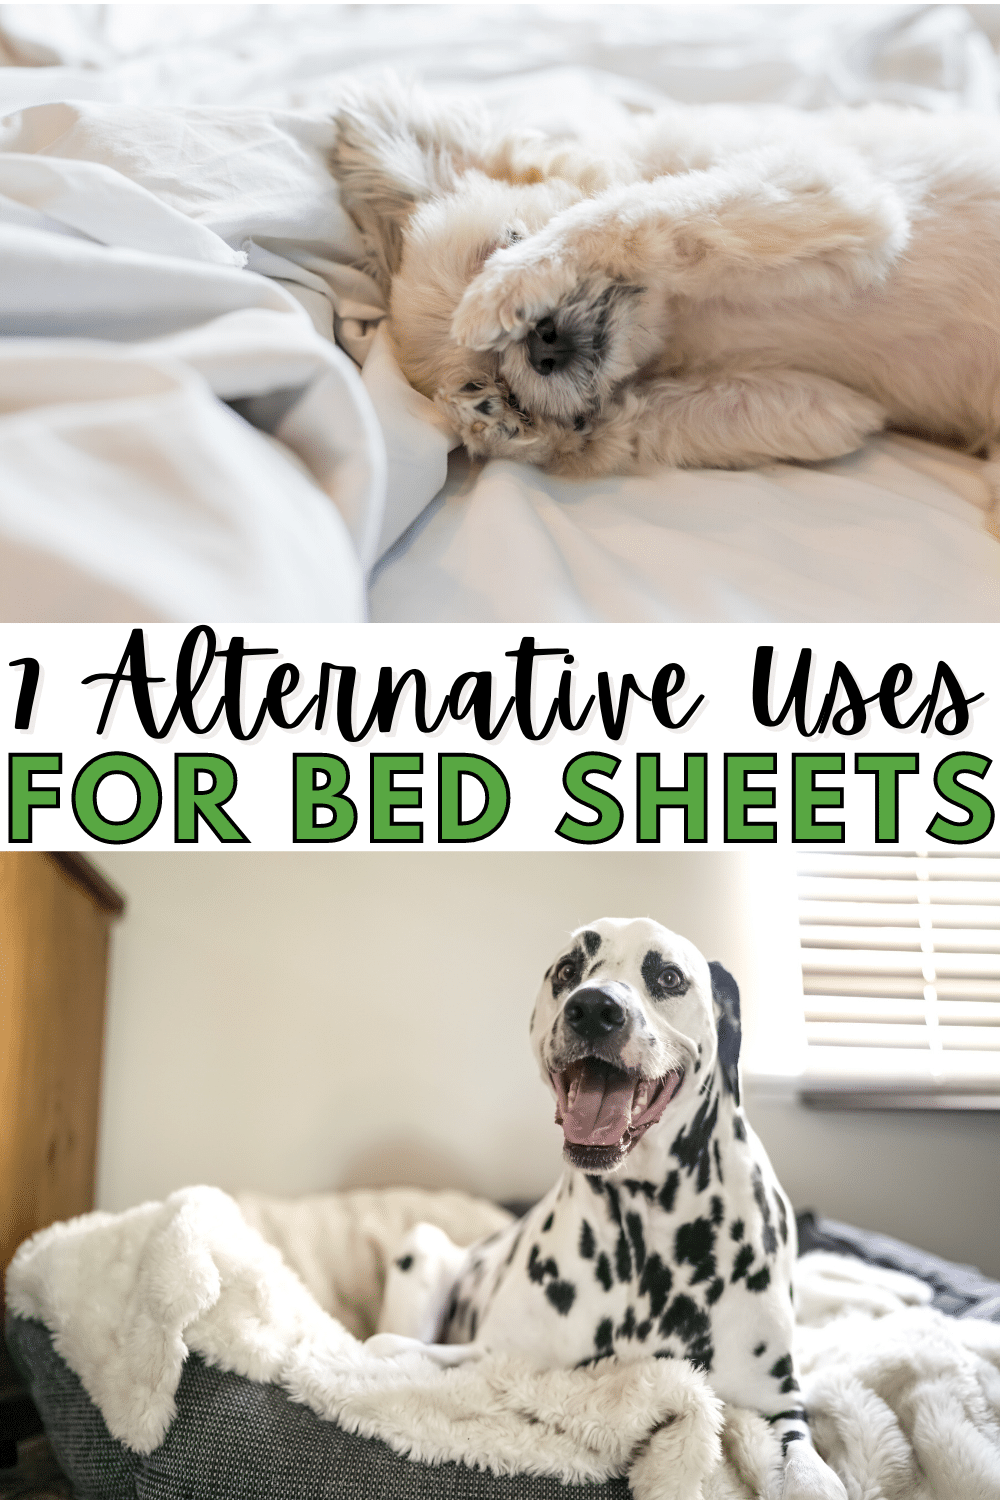 These alternative uses for bed sheets are just awesome! You can do so much more with bed linens than I thought. So, I'm getting my old ones out--this is genius. #diy #bedsheets #householdtips via @wondermomwannab